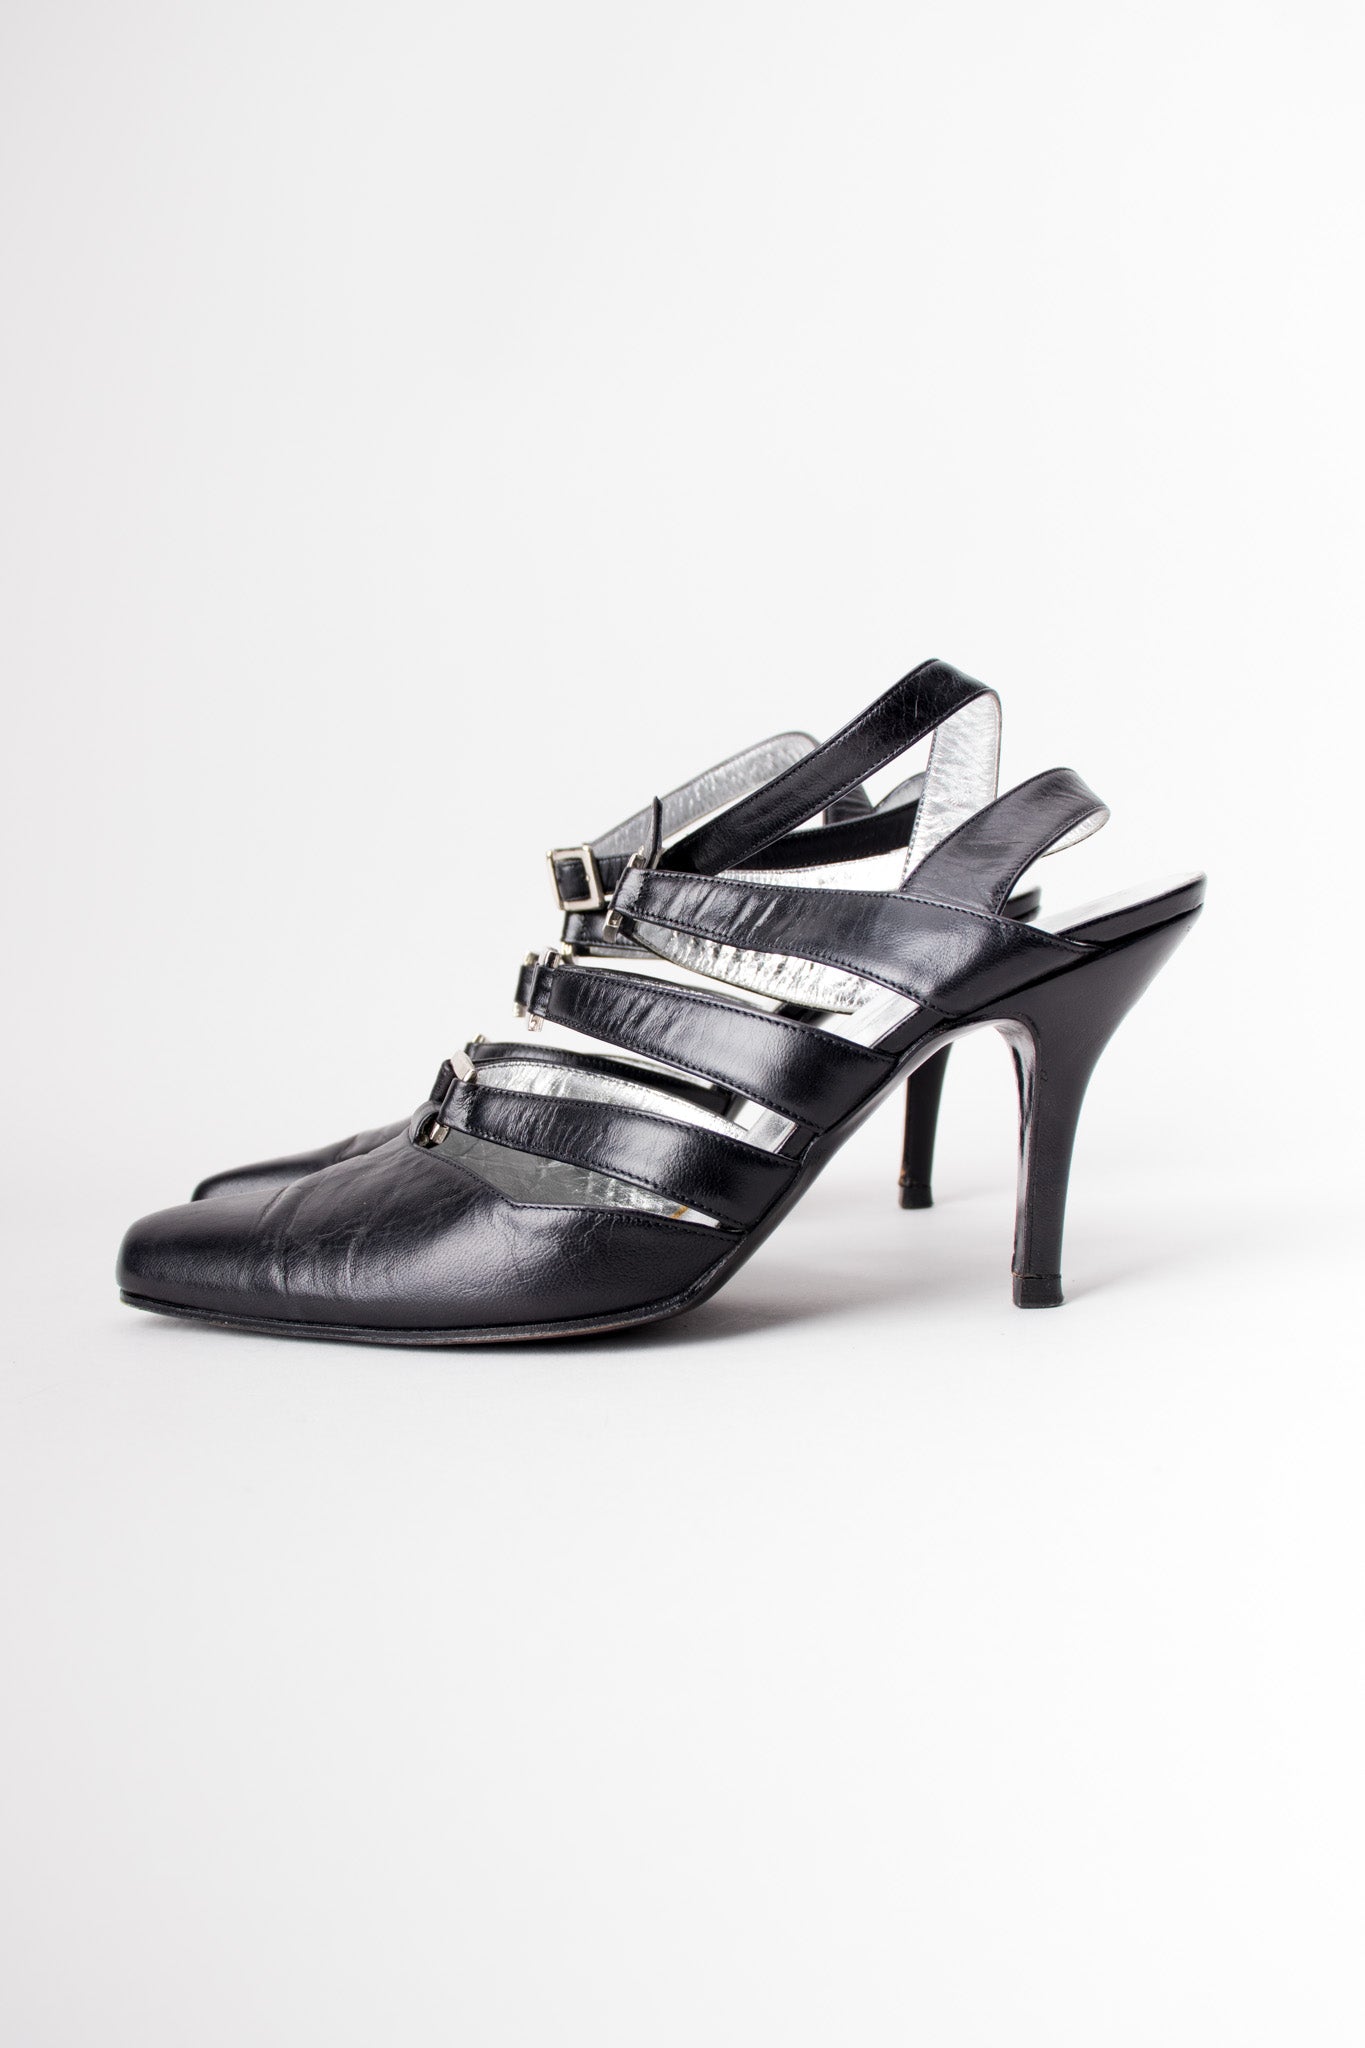 Thierry Mugler Leather Strappy Bondage Buckle Heels